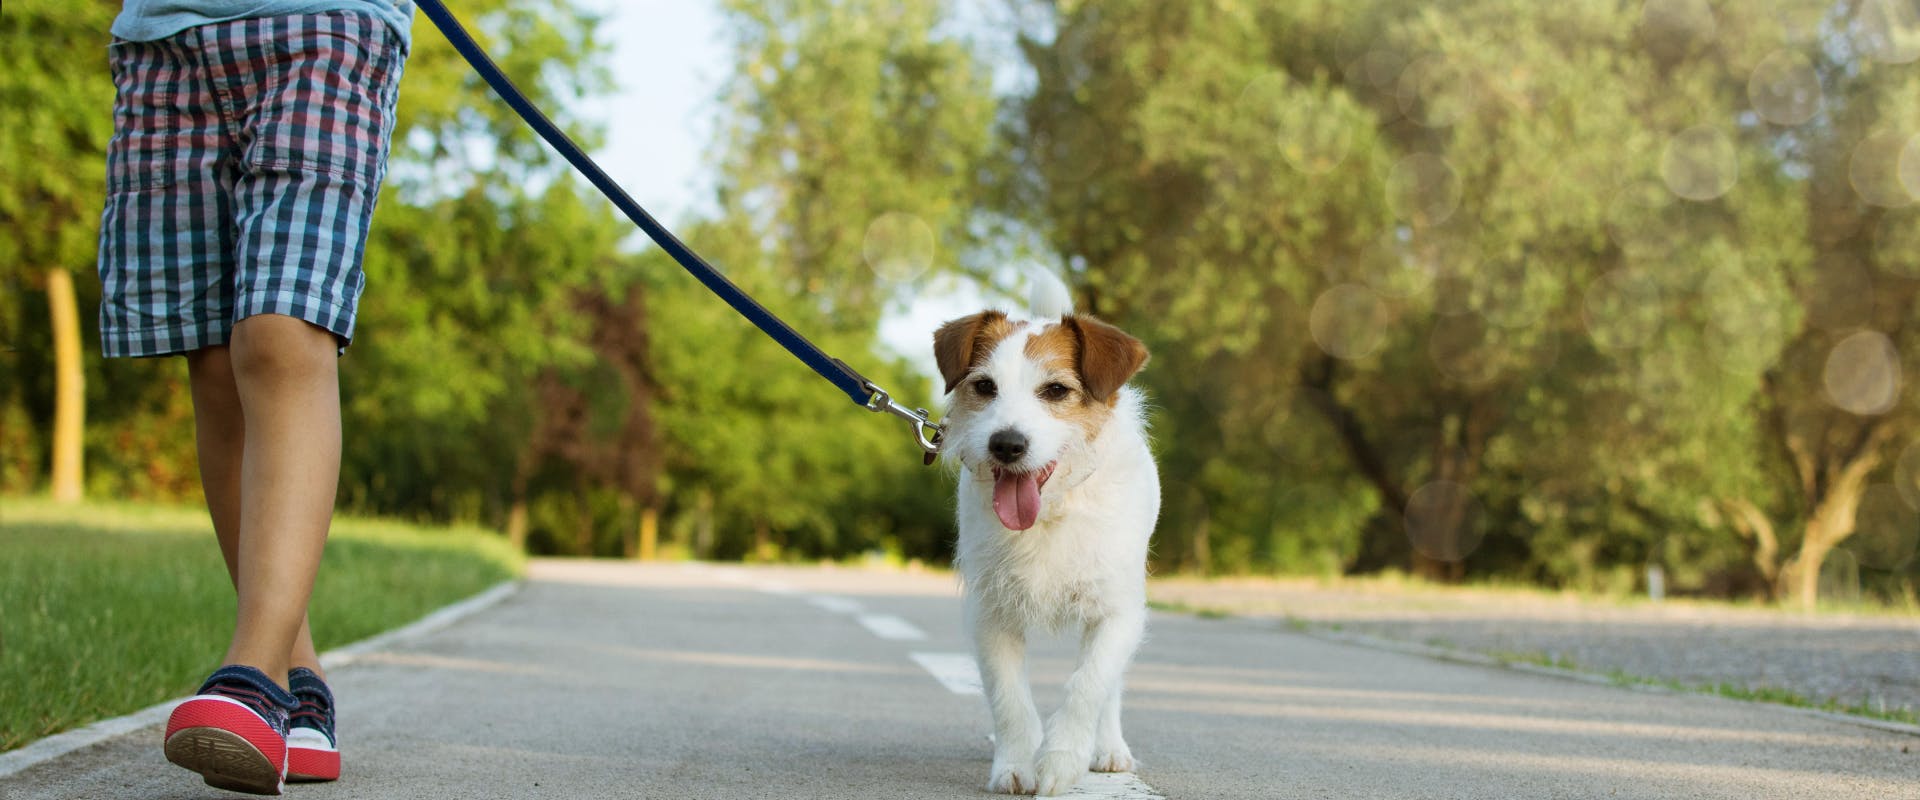 a young terrier walking on an asphalt path with a leash and collar